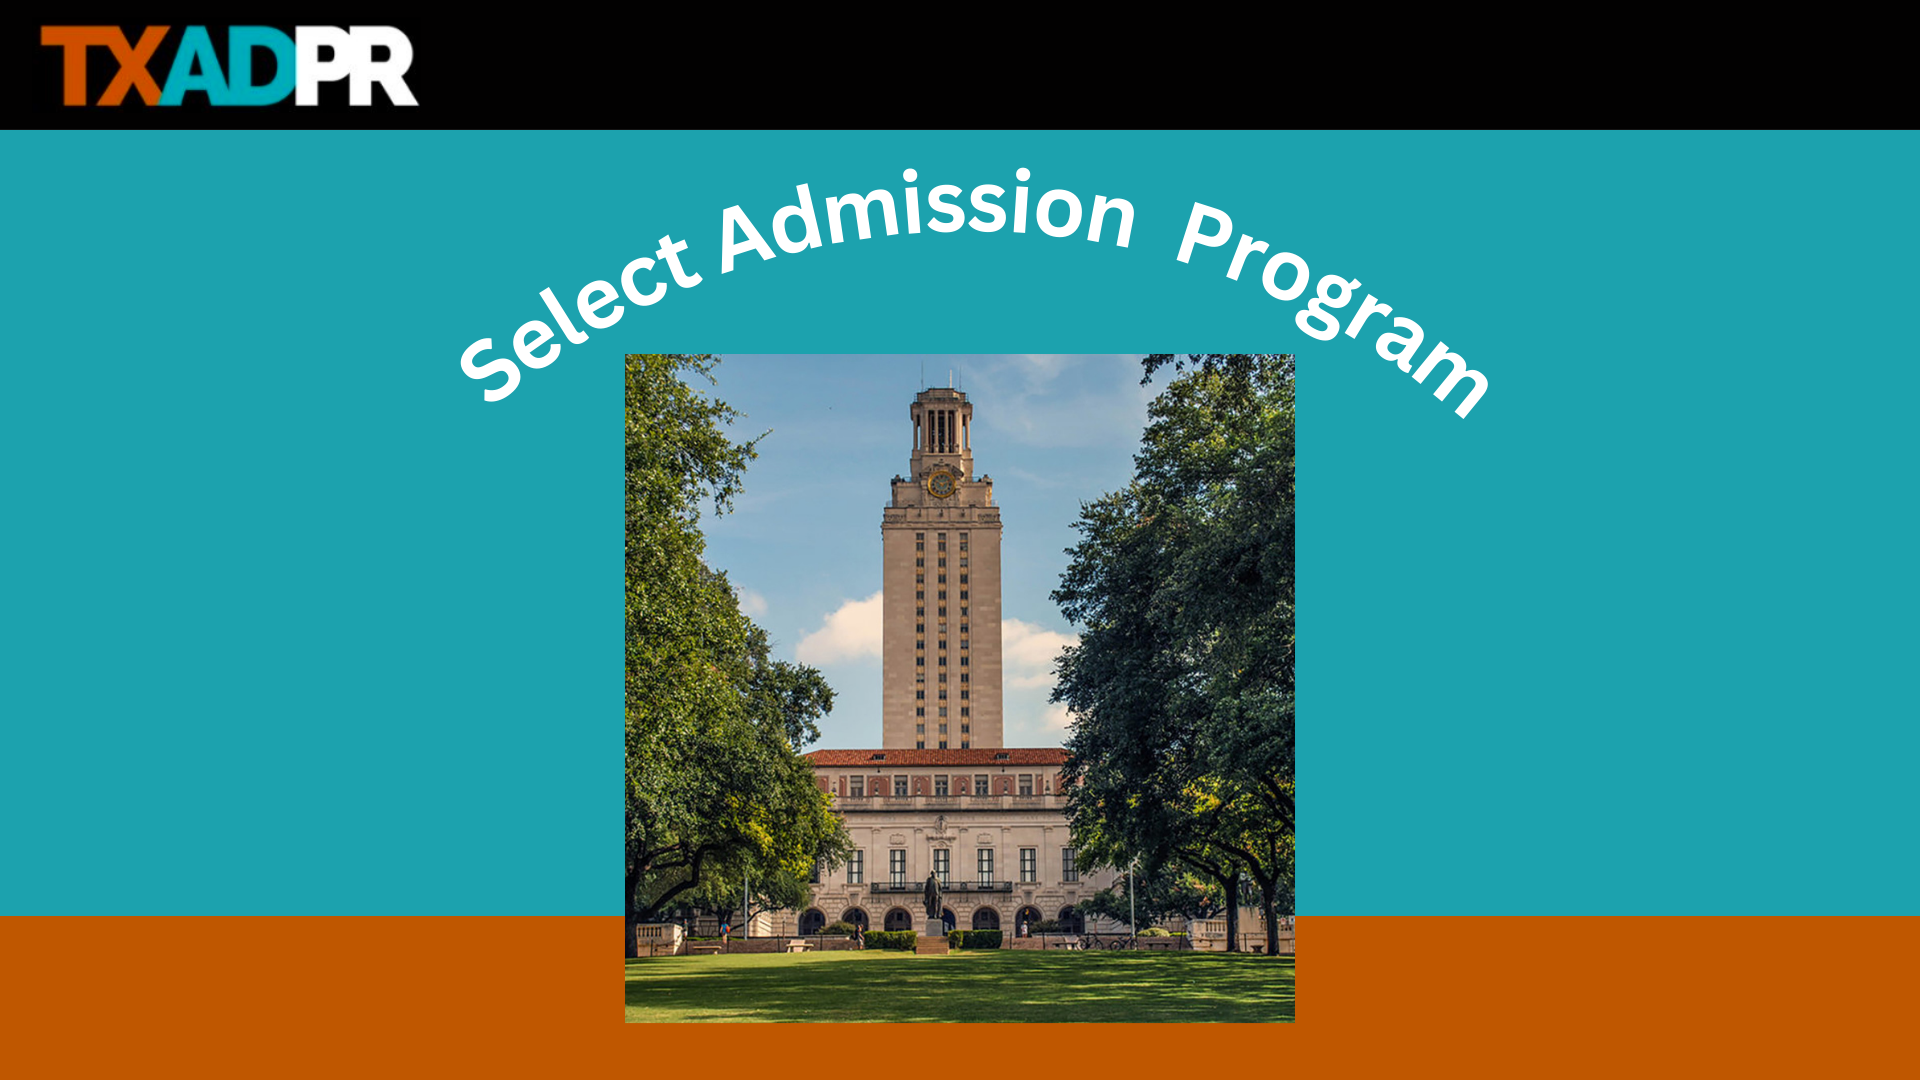 The words "Select Admission Program" arched over a photo of the UT Tower